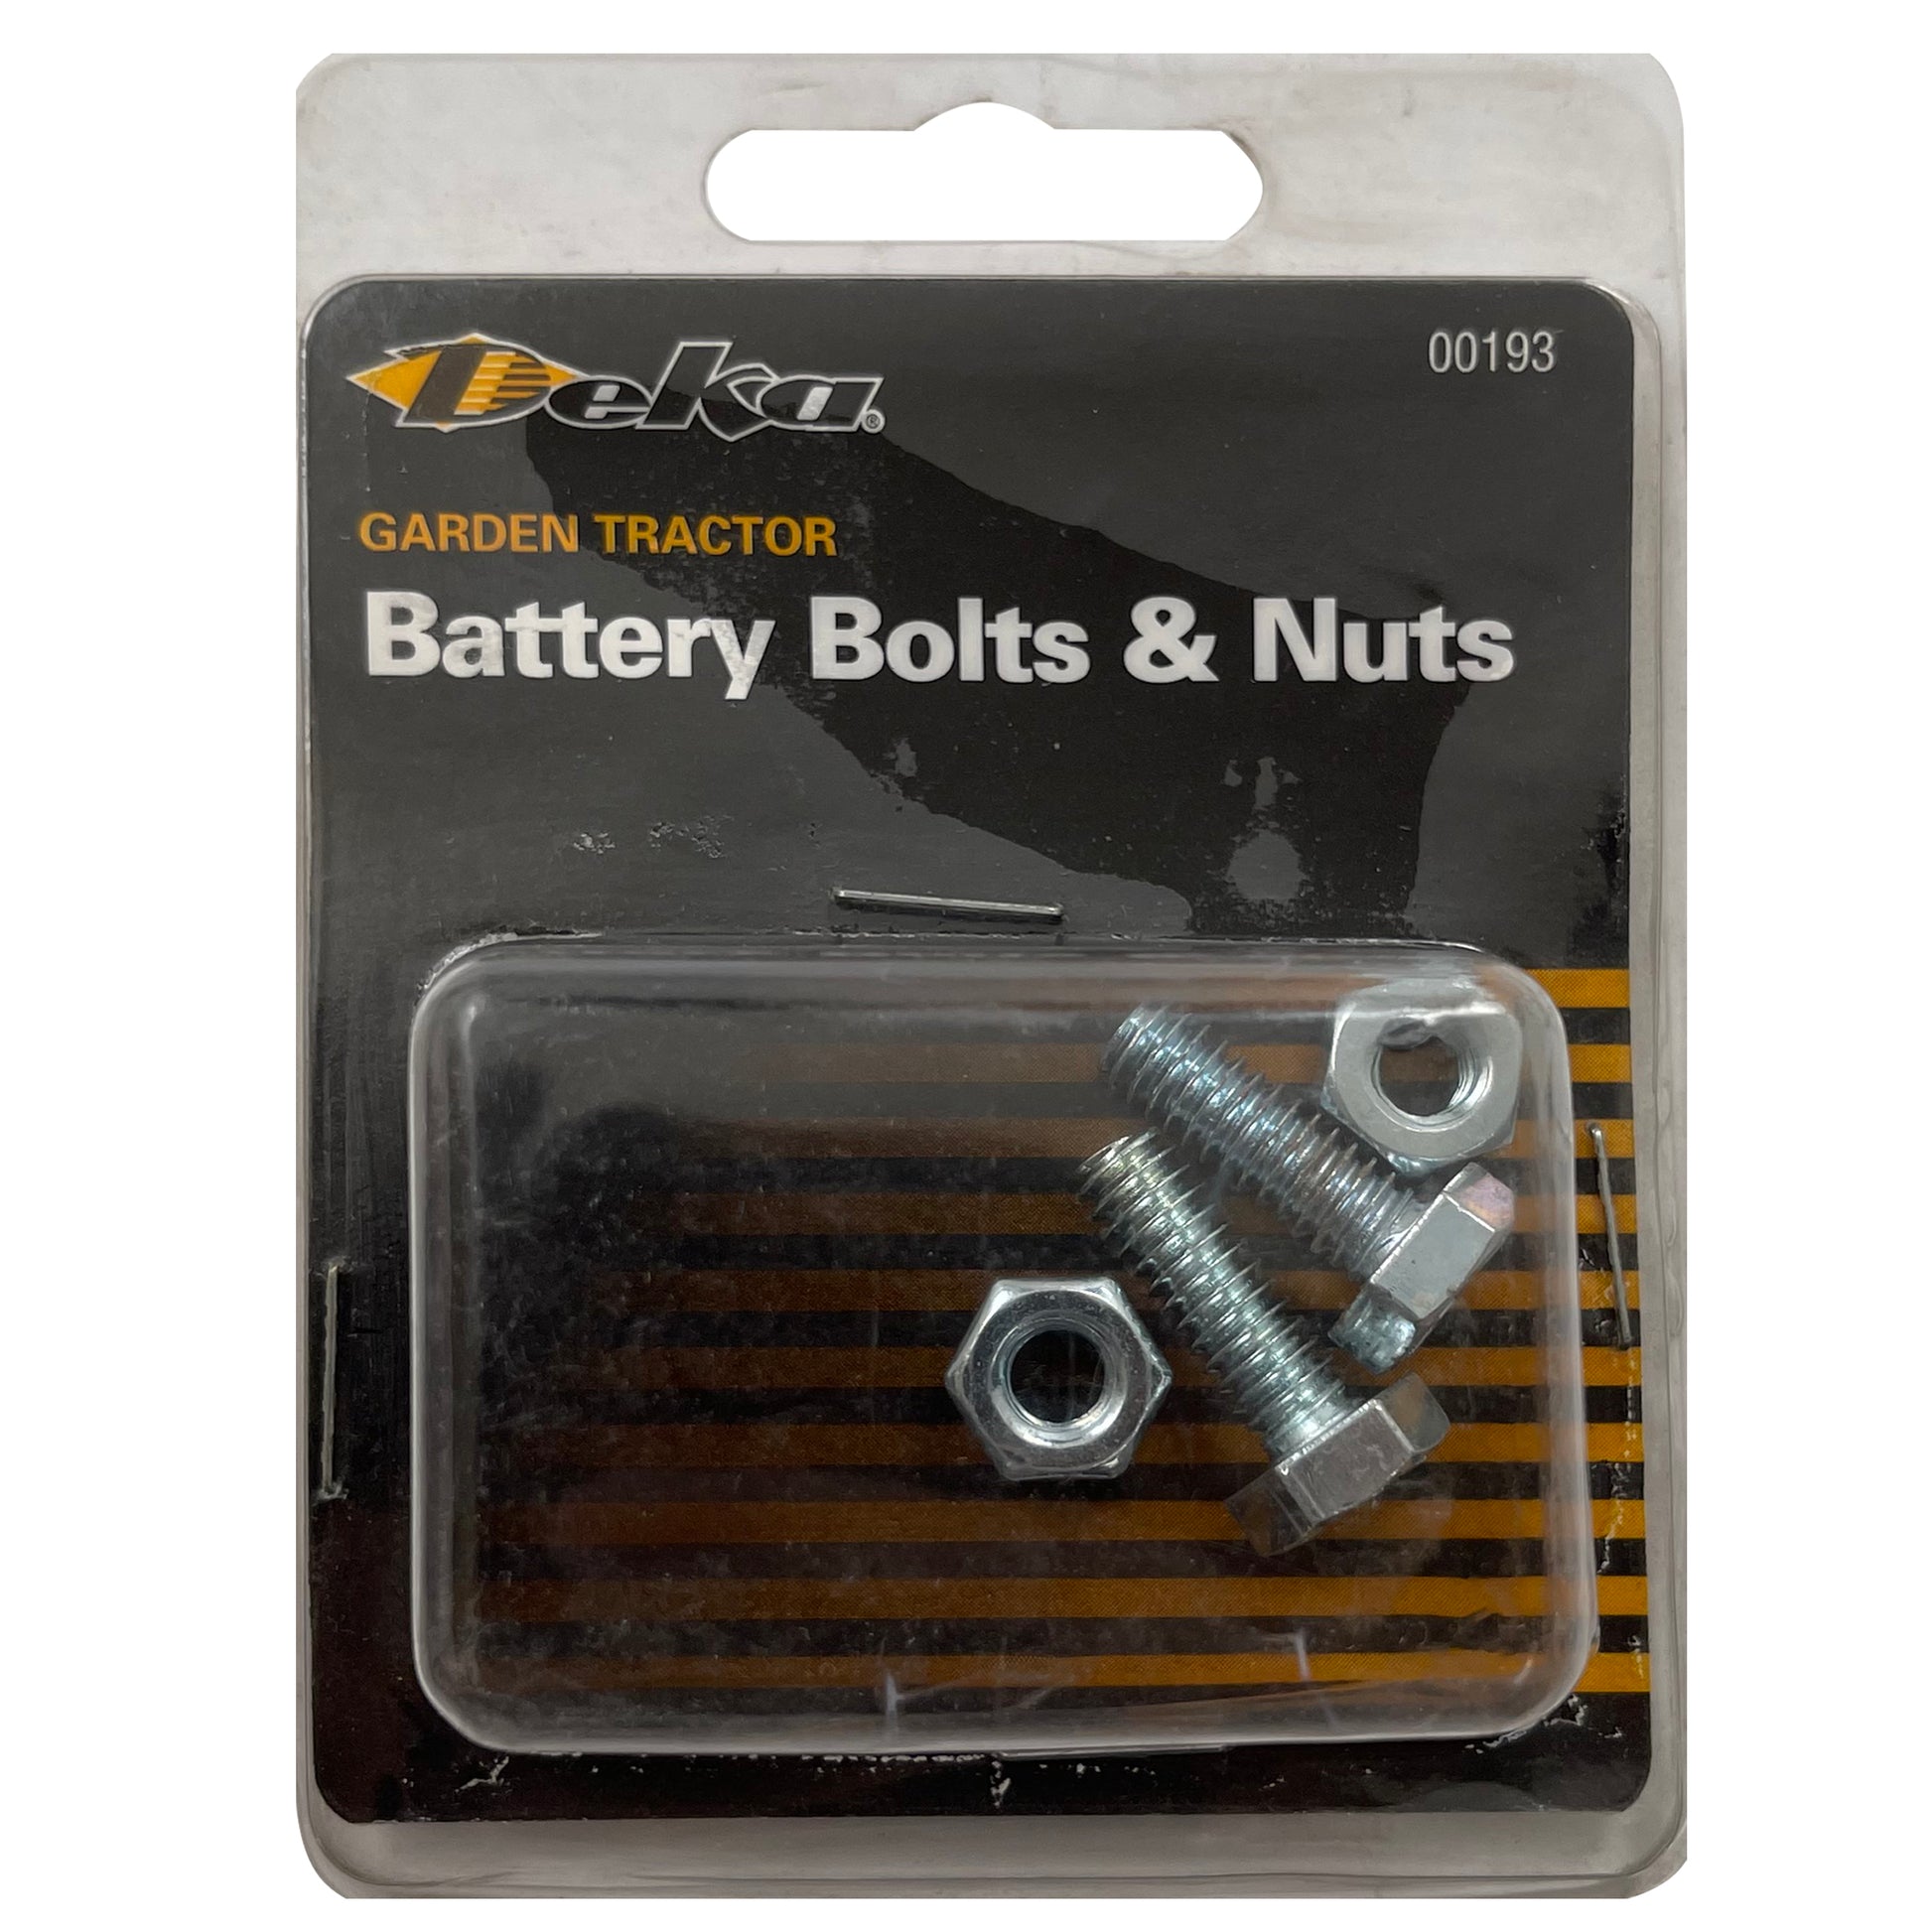 Garden Tractor Battery (2) Bolts & Nuts 1/4-20 X 3/4 Fits U1 Battery